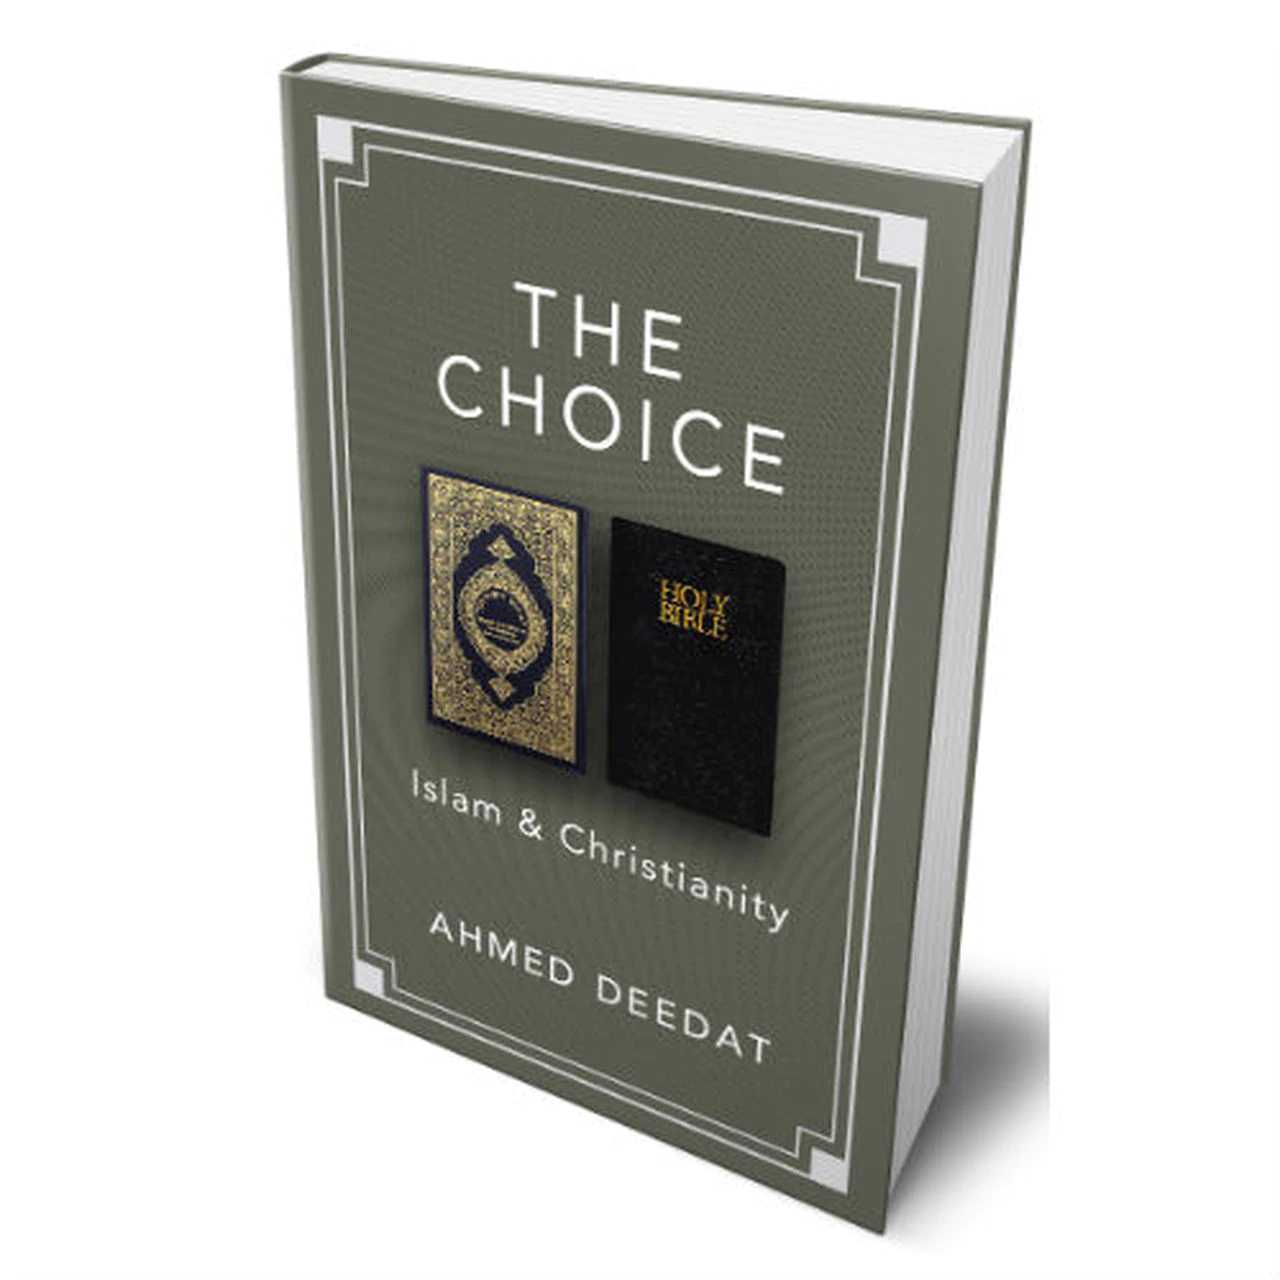 The Choice: Islam and Christianity by Ahmed Deedat